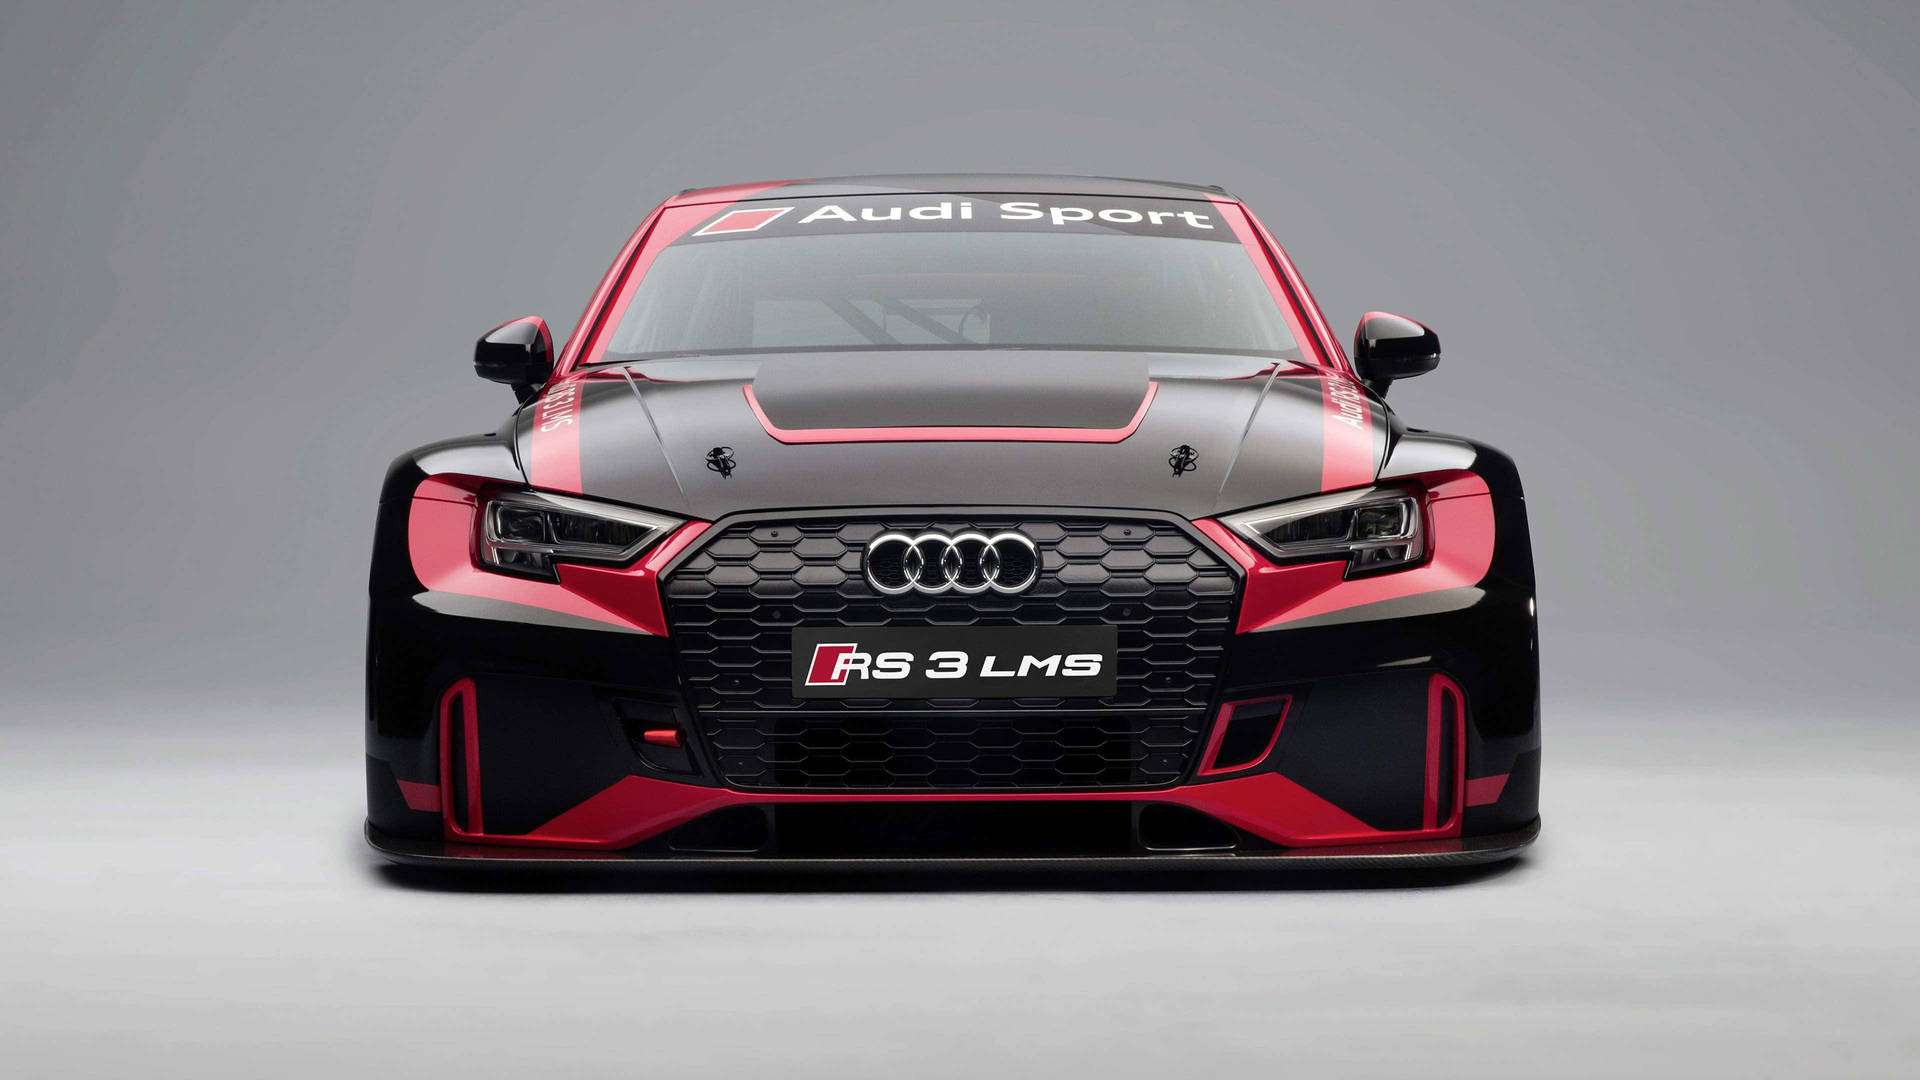 Audi Rs 3 Lms Front View